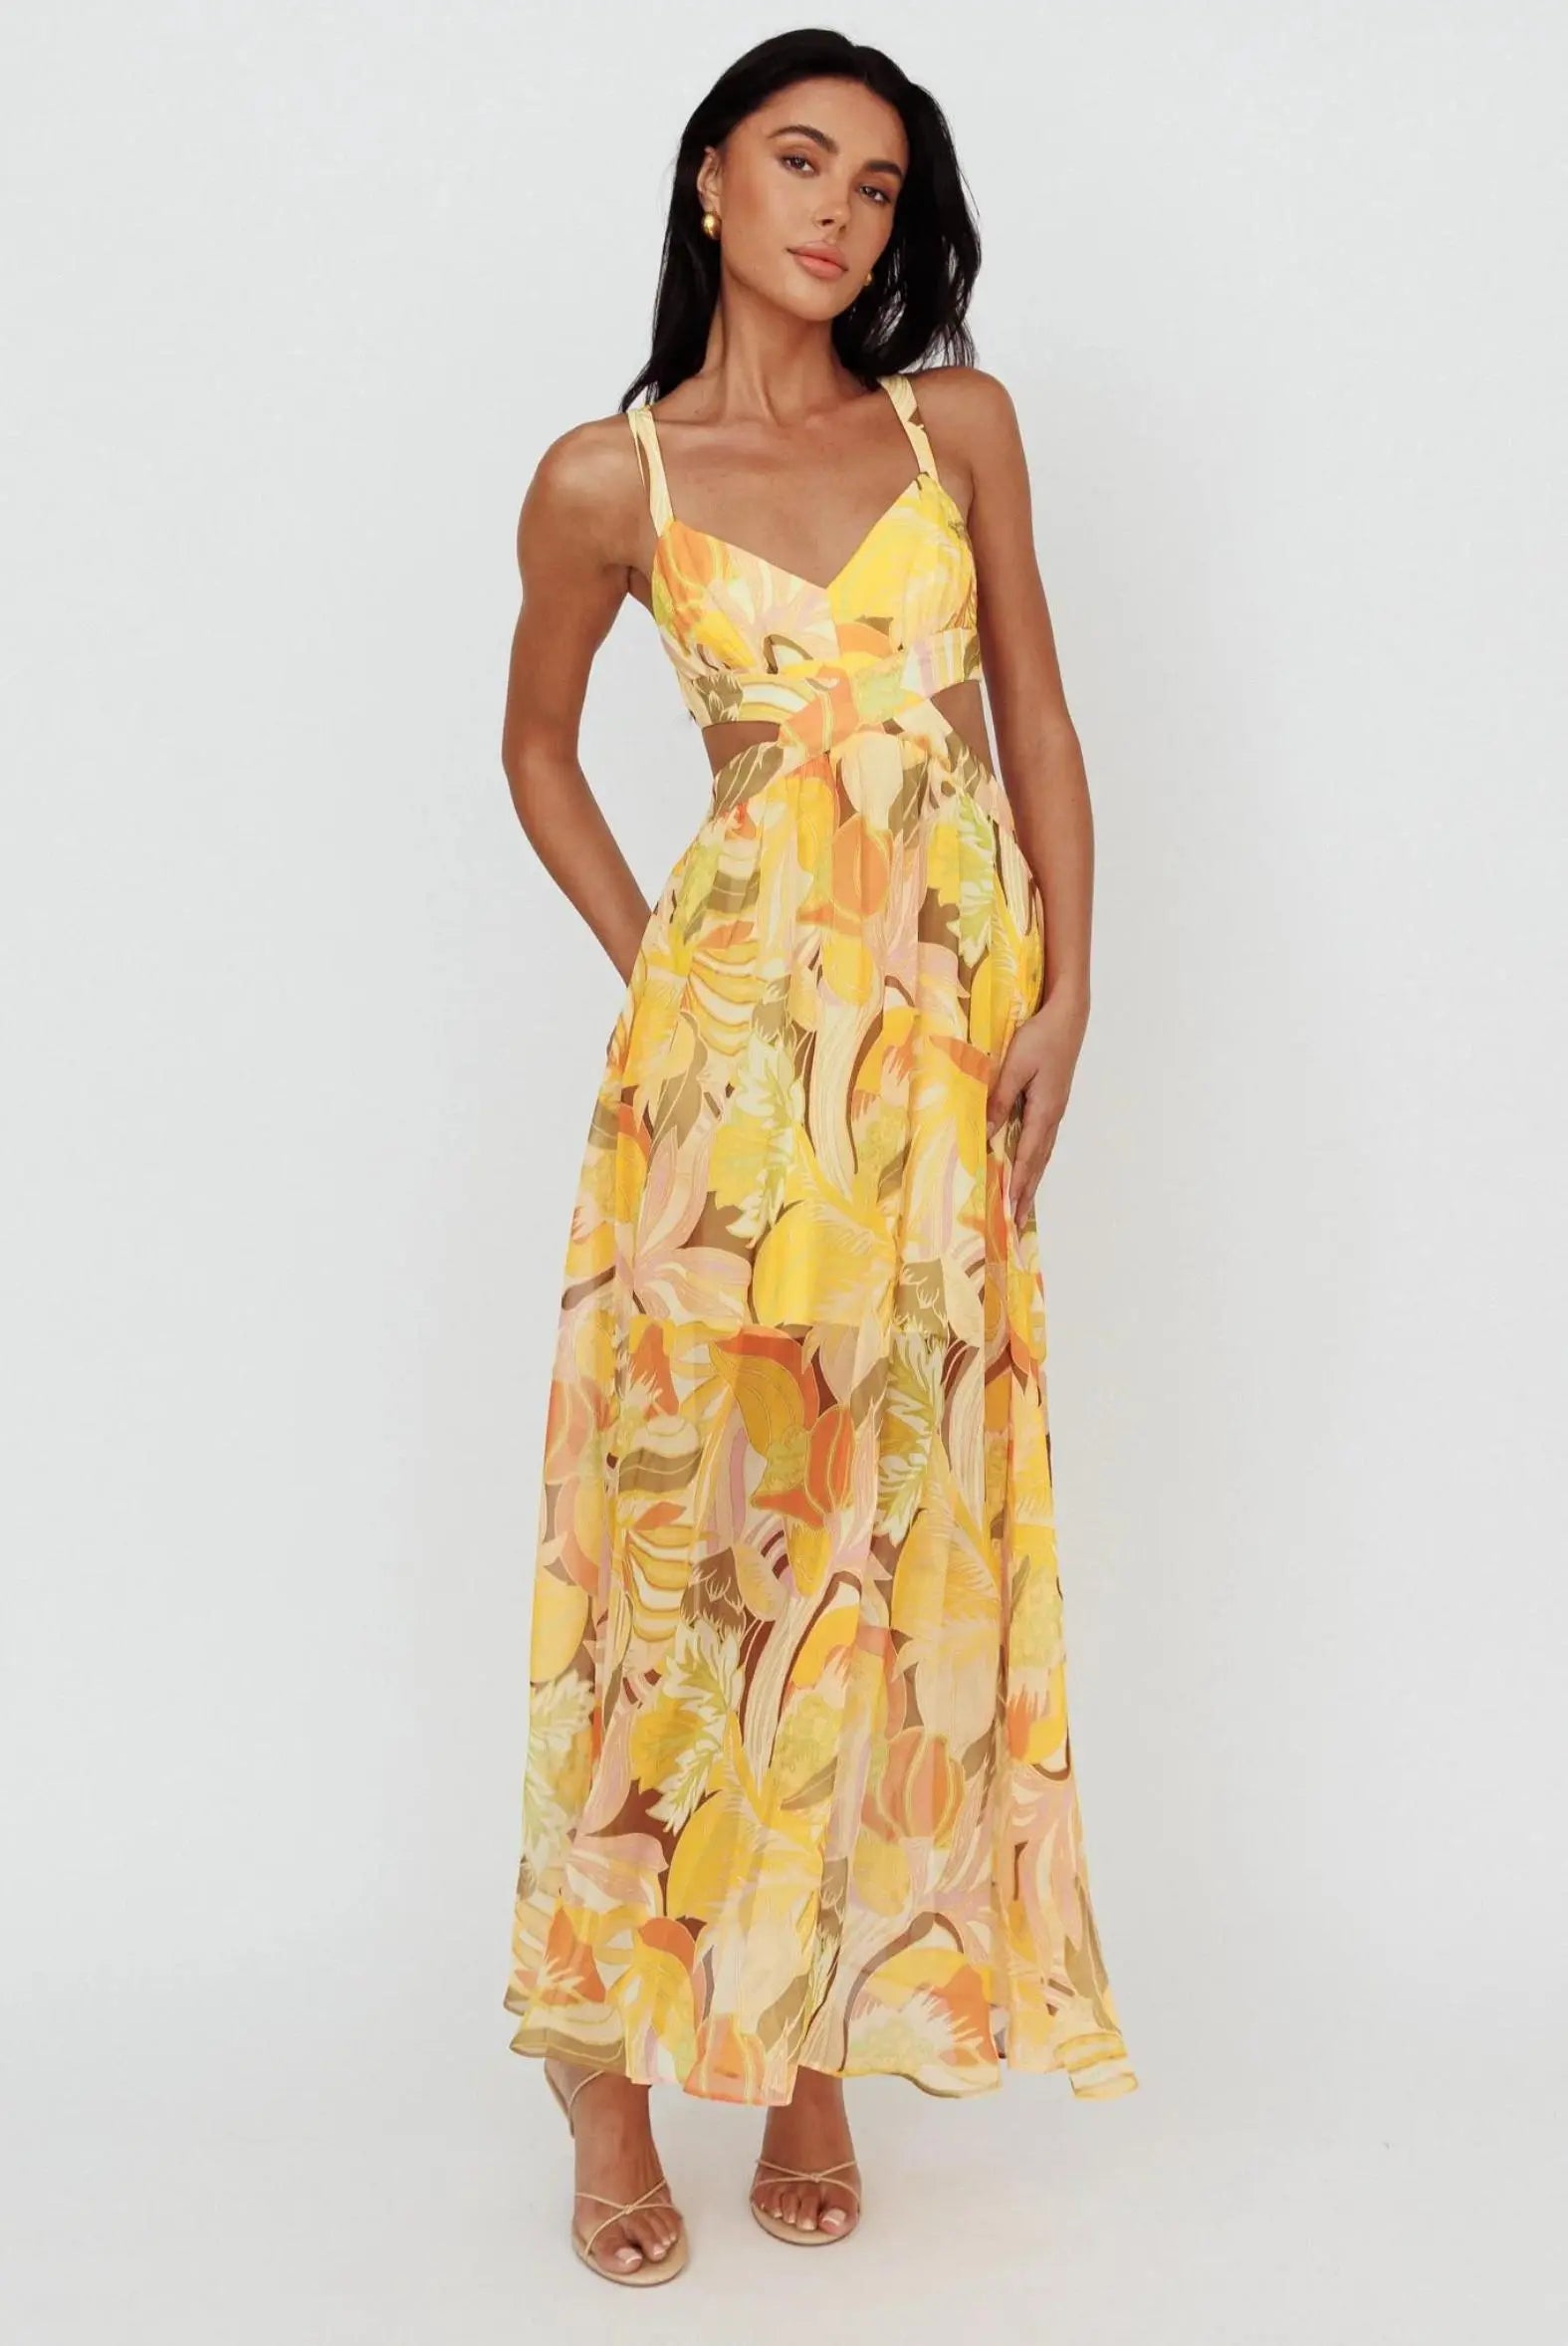 MARIGOLD MAXI DRESS | YELLOW FLORAL HERE COMES THE SUN